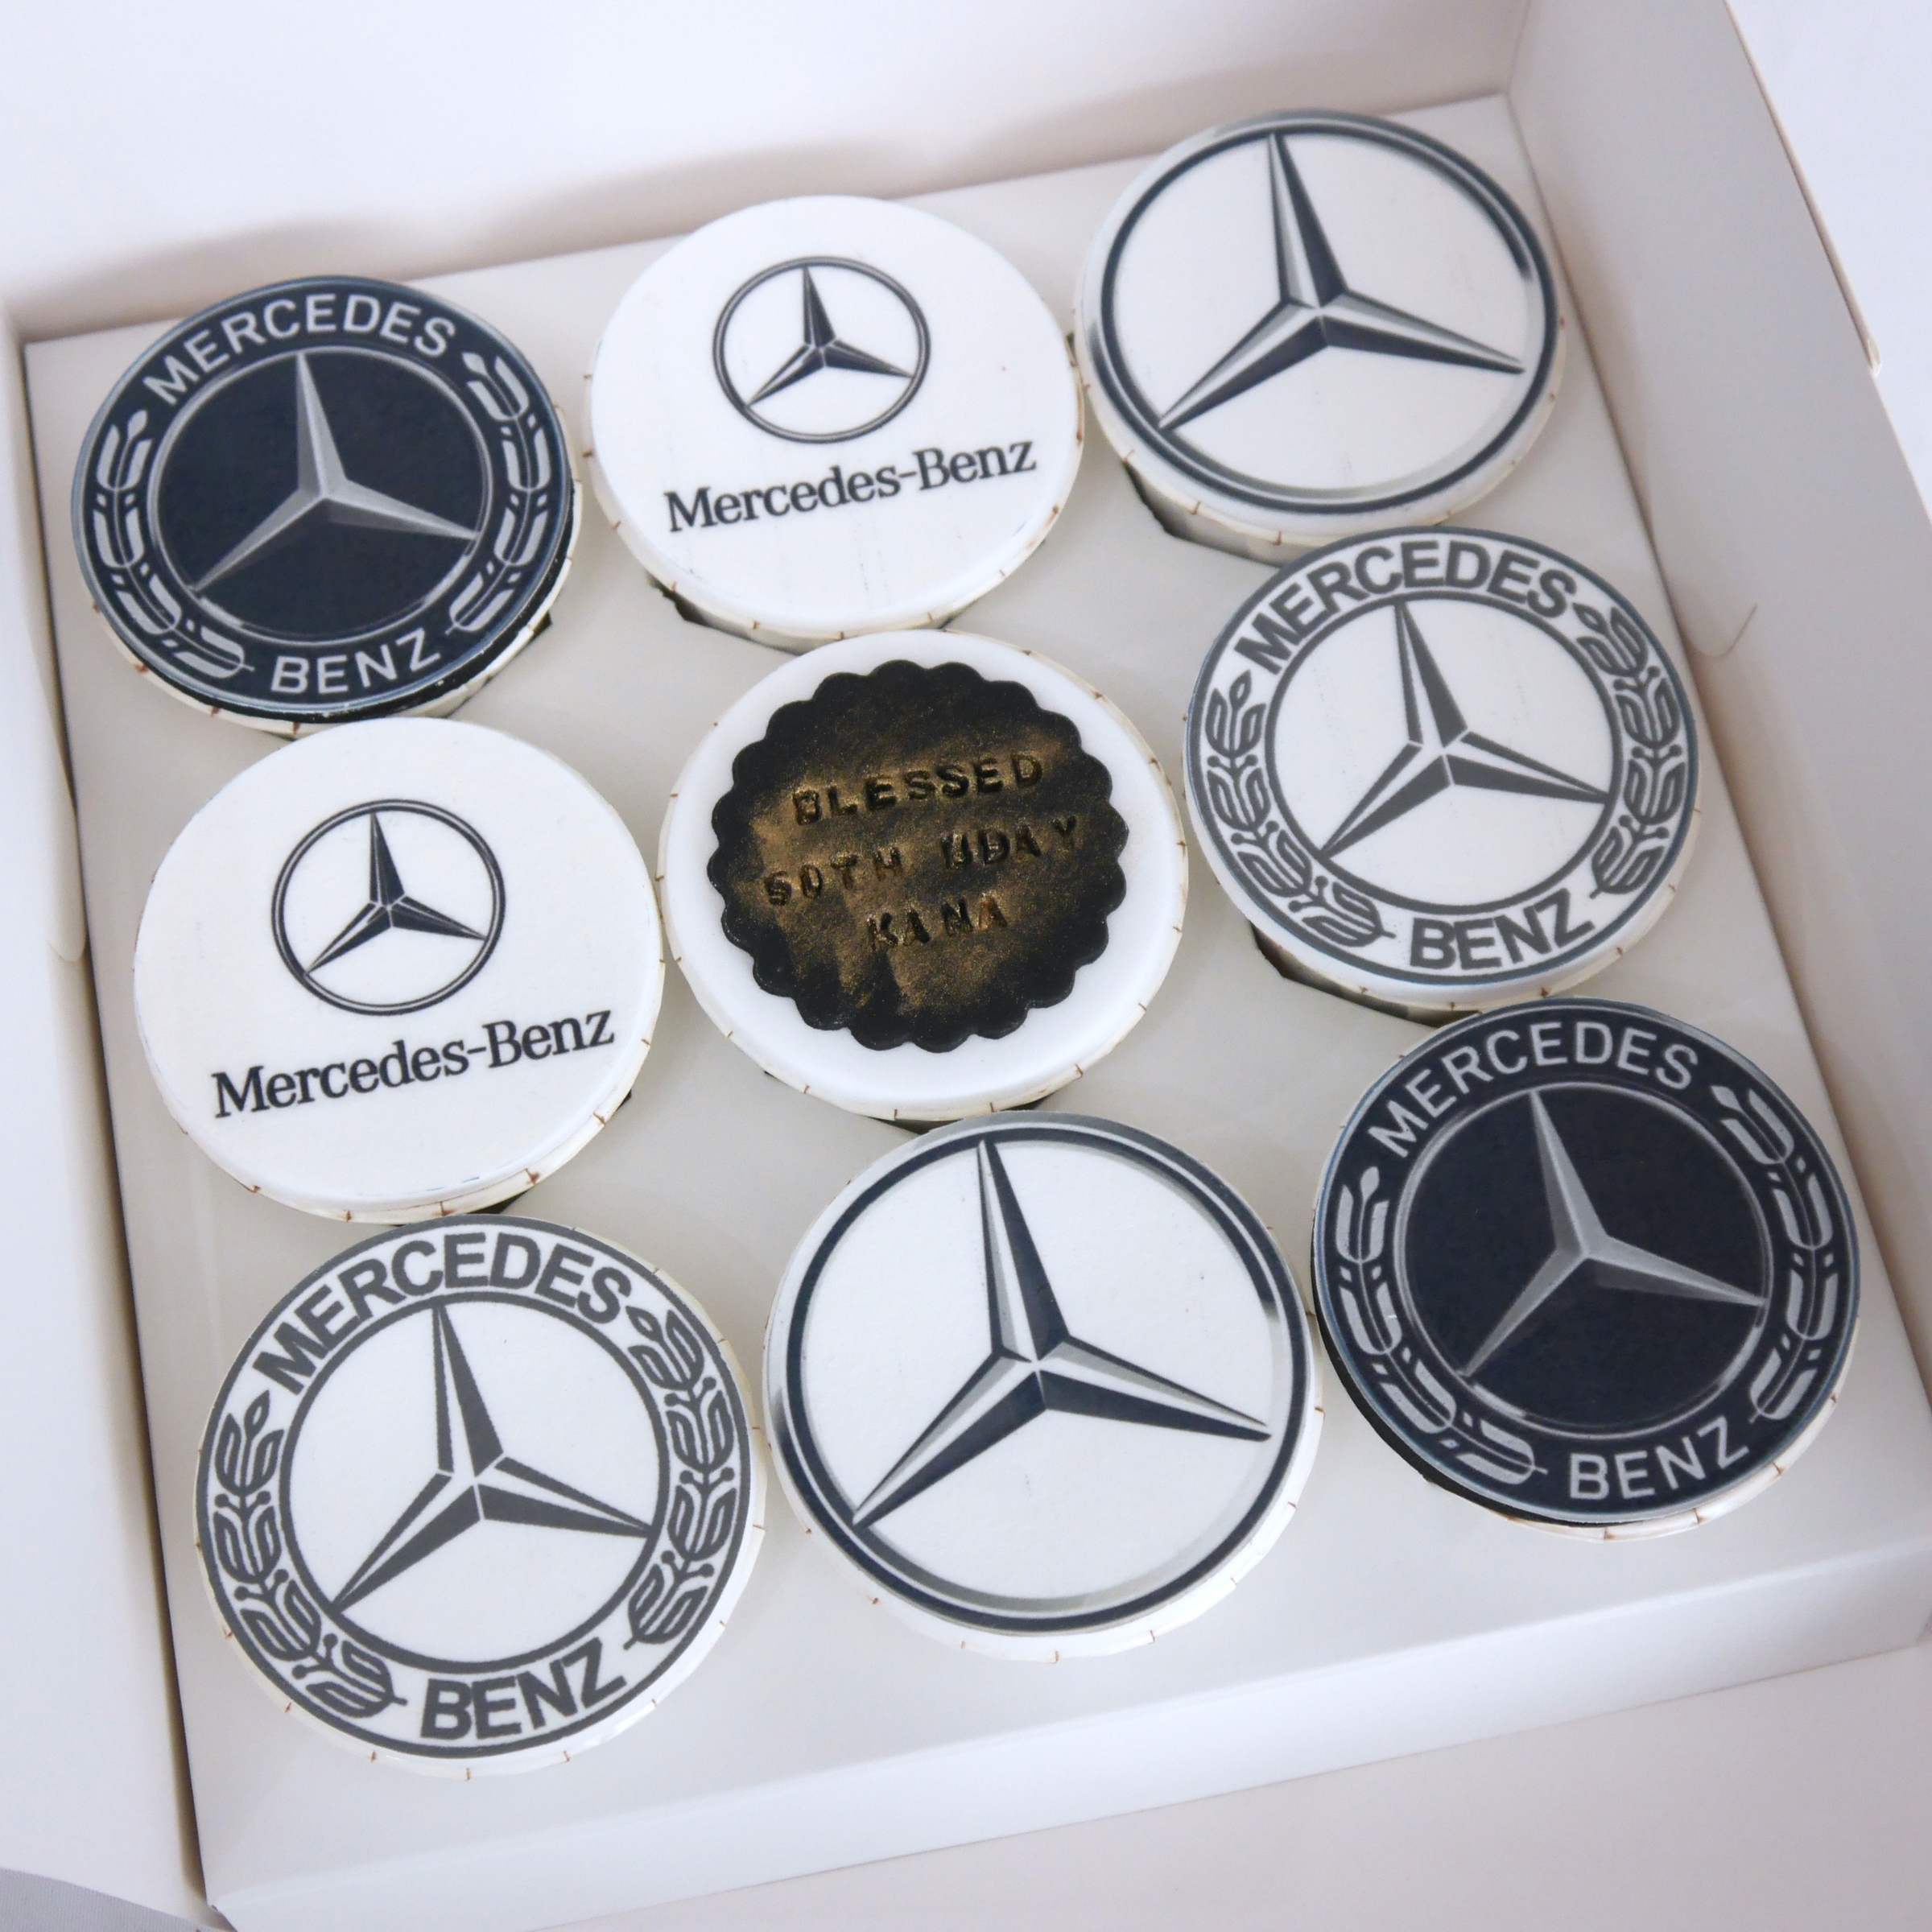 Designing Cakes Delivery | Logo Cakes, Brand Cakes Delivery